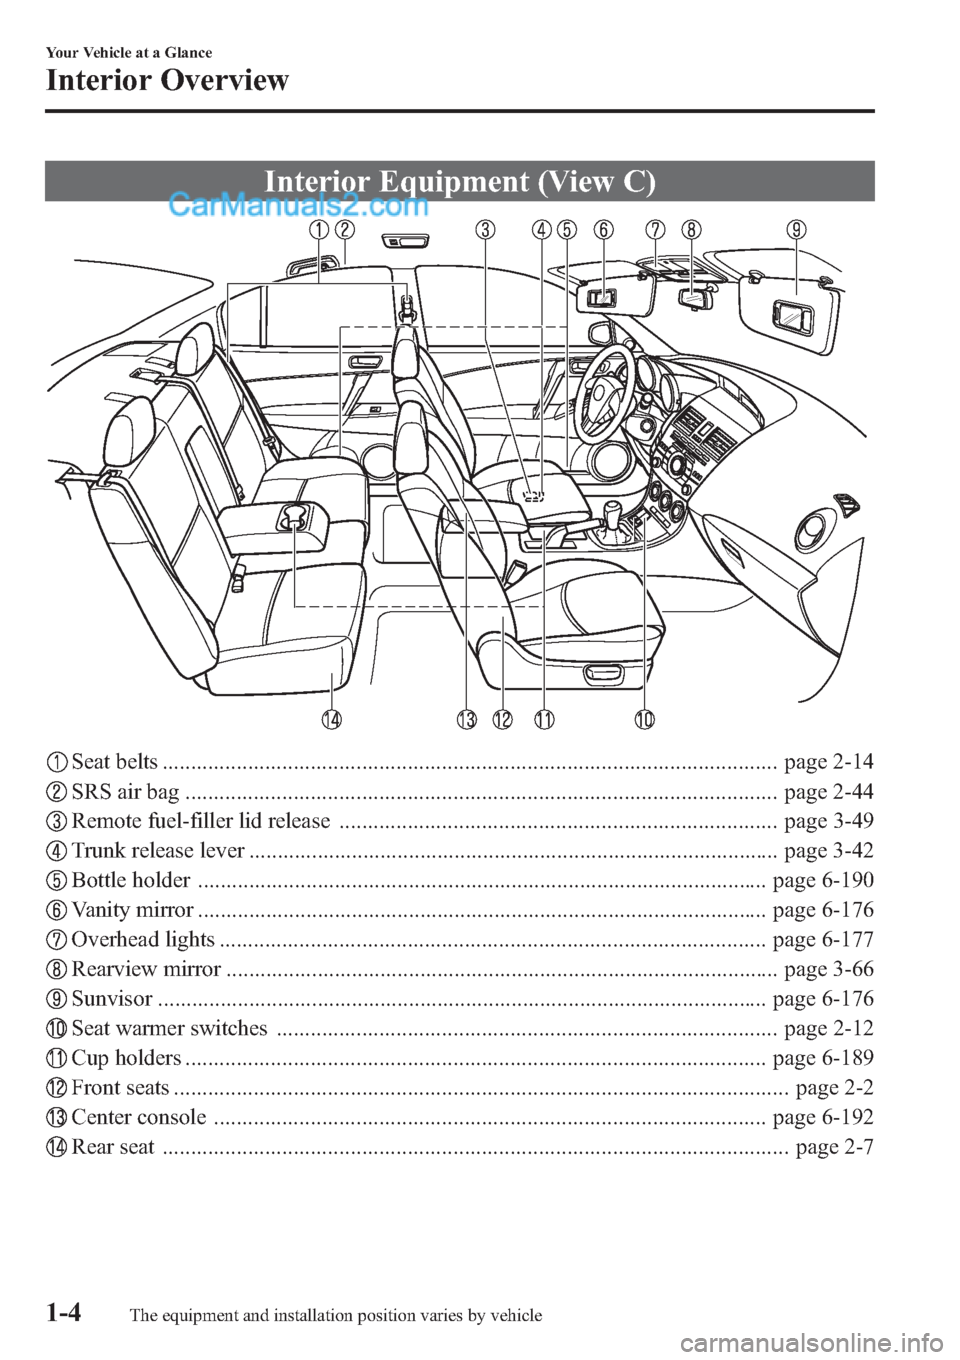 MAZDA MODEL MAZDASPEED 3 2013  Owners Manual (in English) Interior Equipment (View C)
Seat belts ............................................................................................................ page 2-14
SRS air bag ..............................